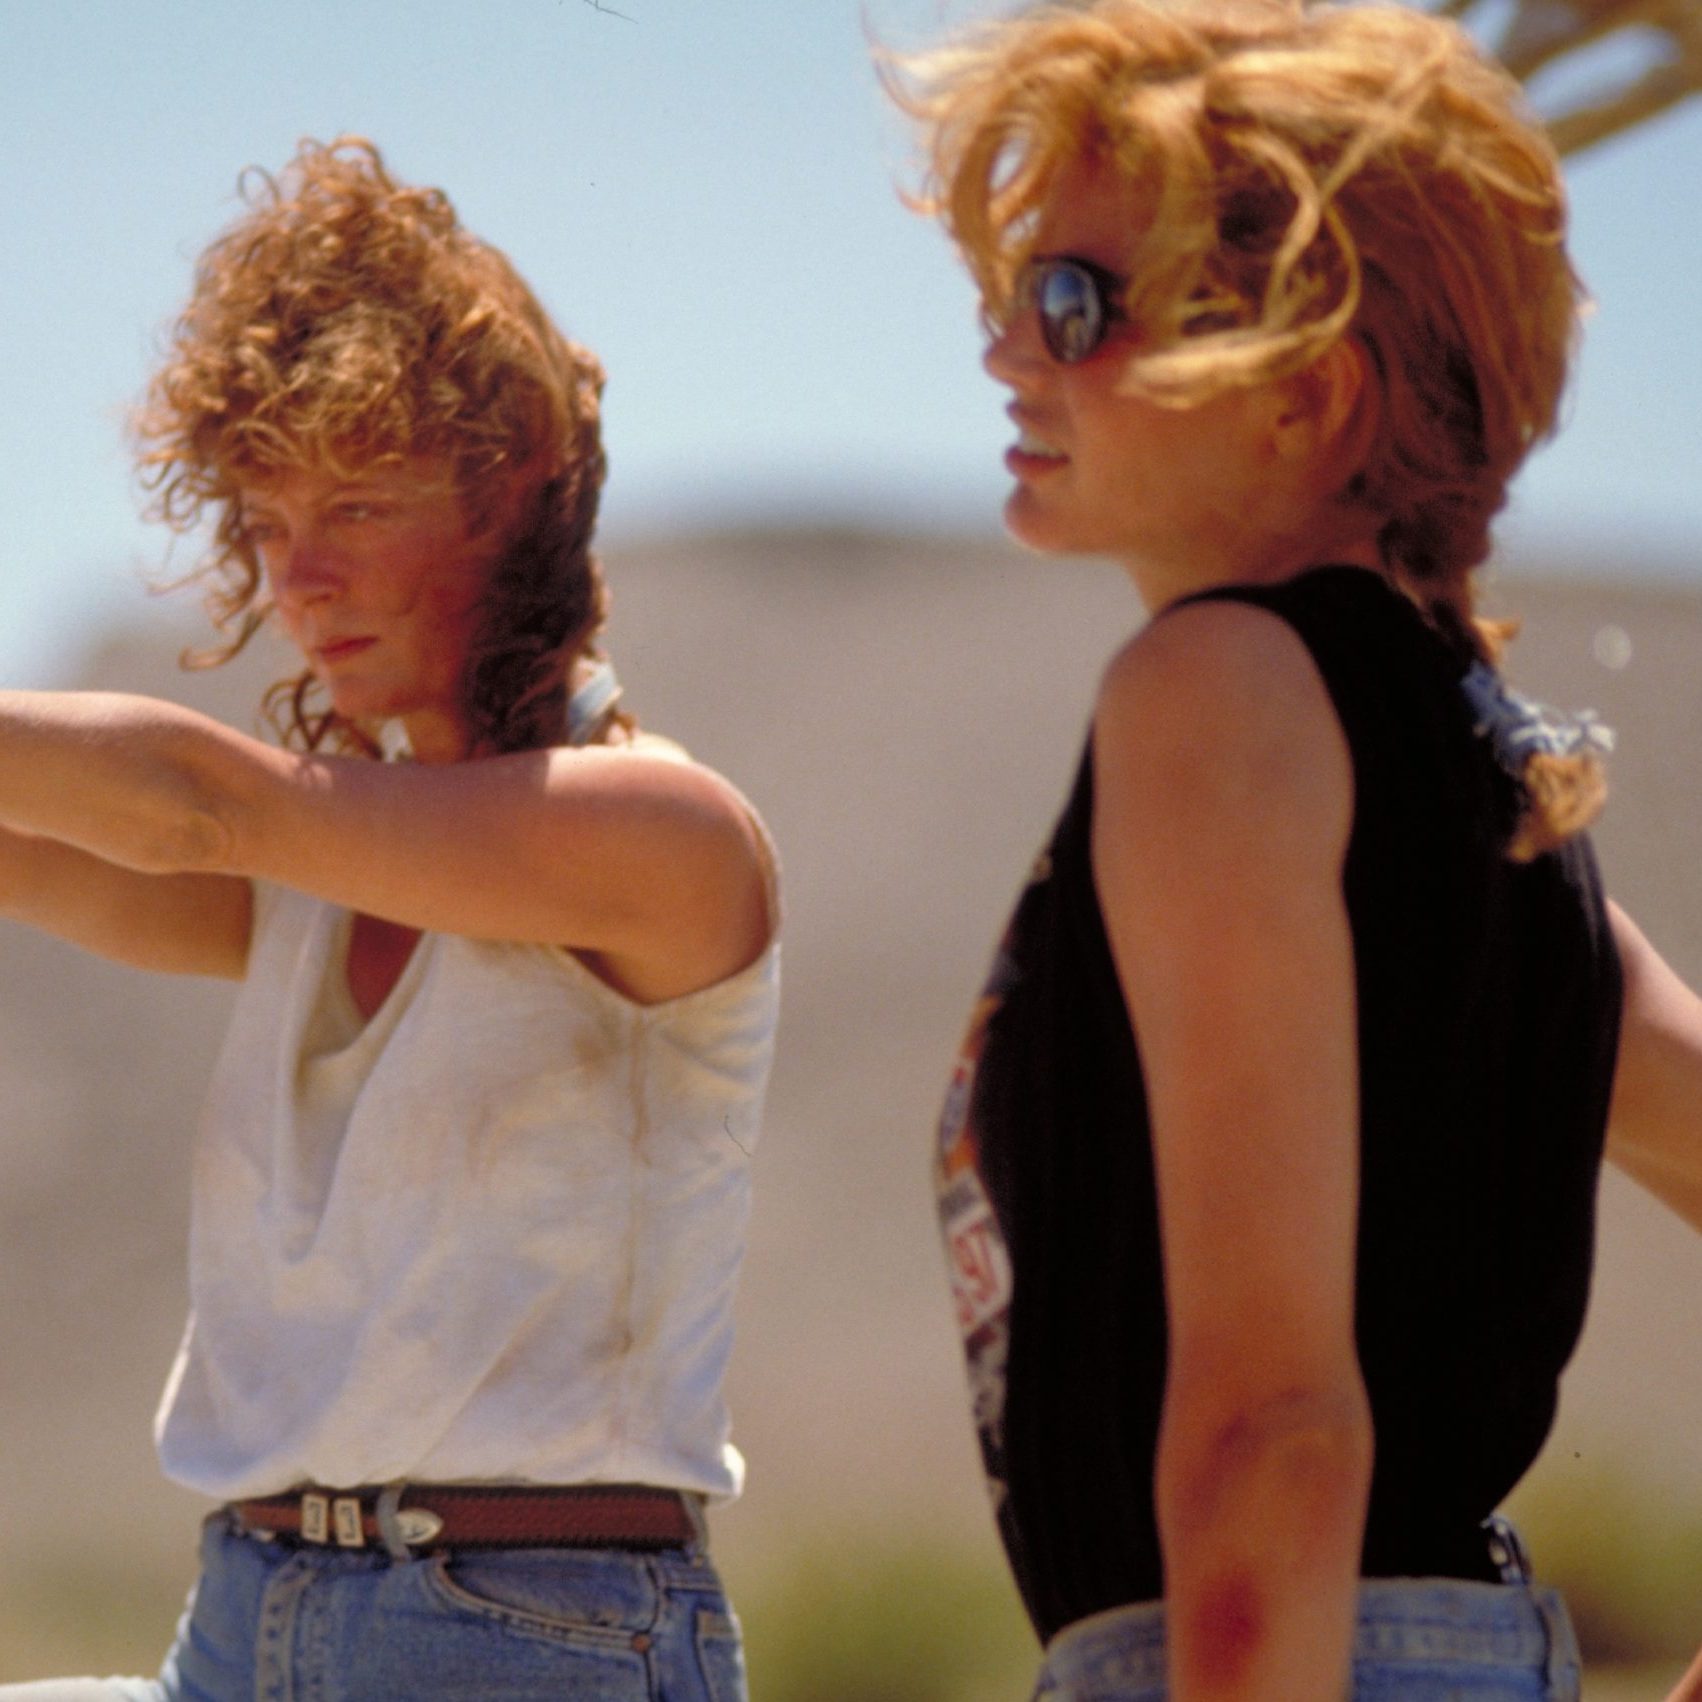 Thelma & Louise (1991) – IS IT INTERESTING